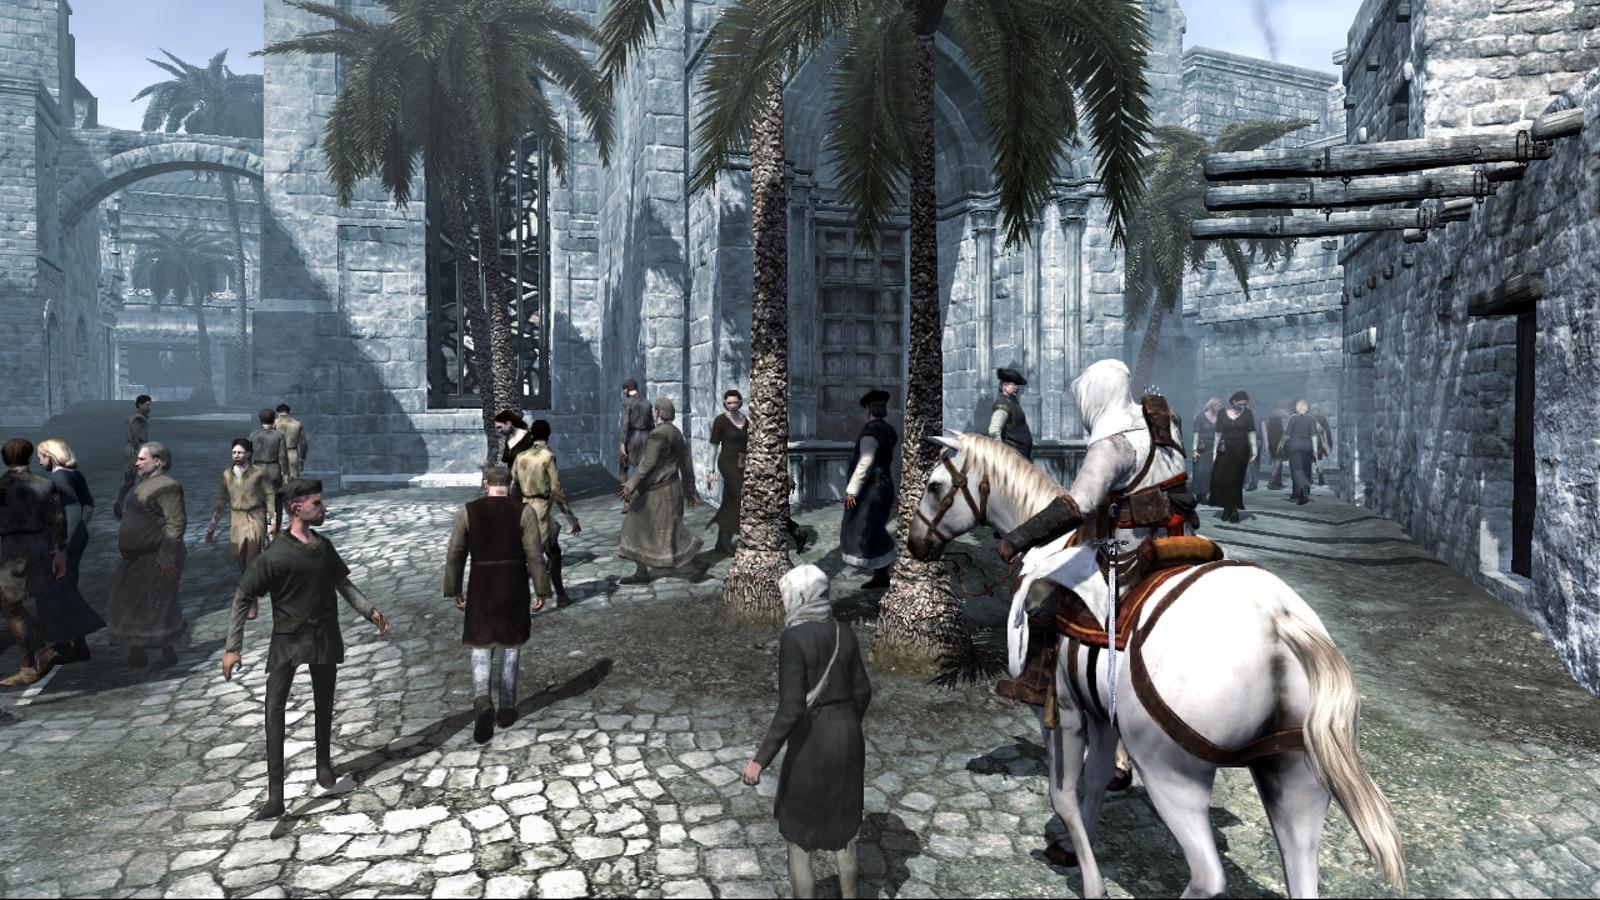 Let's Rank The Assassin's Creed Games, Worst To Best